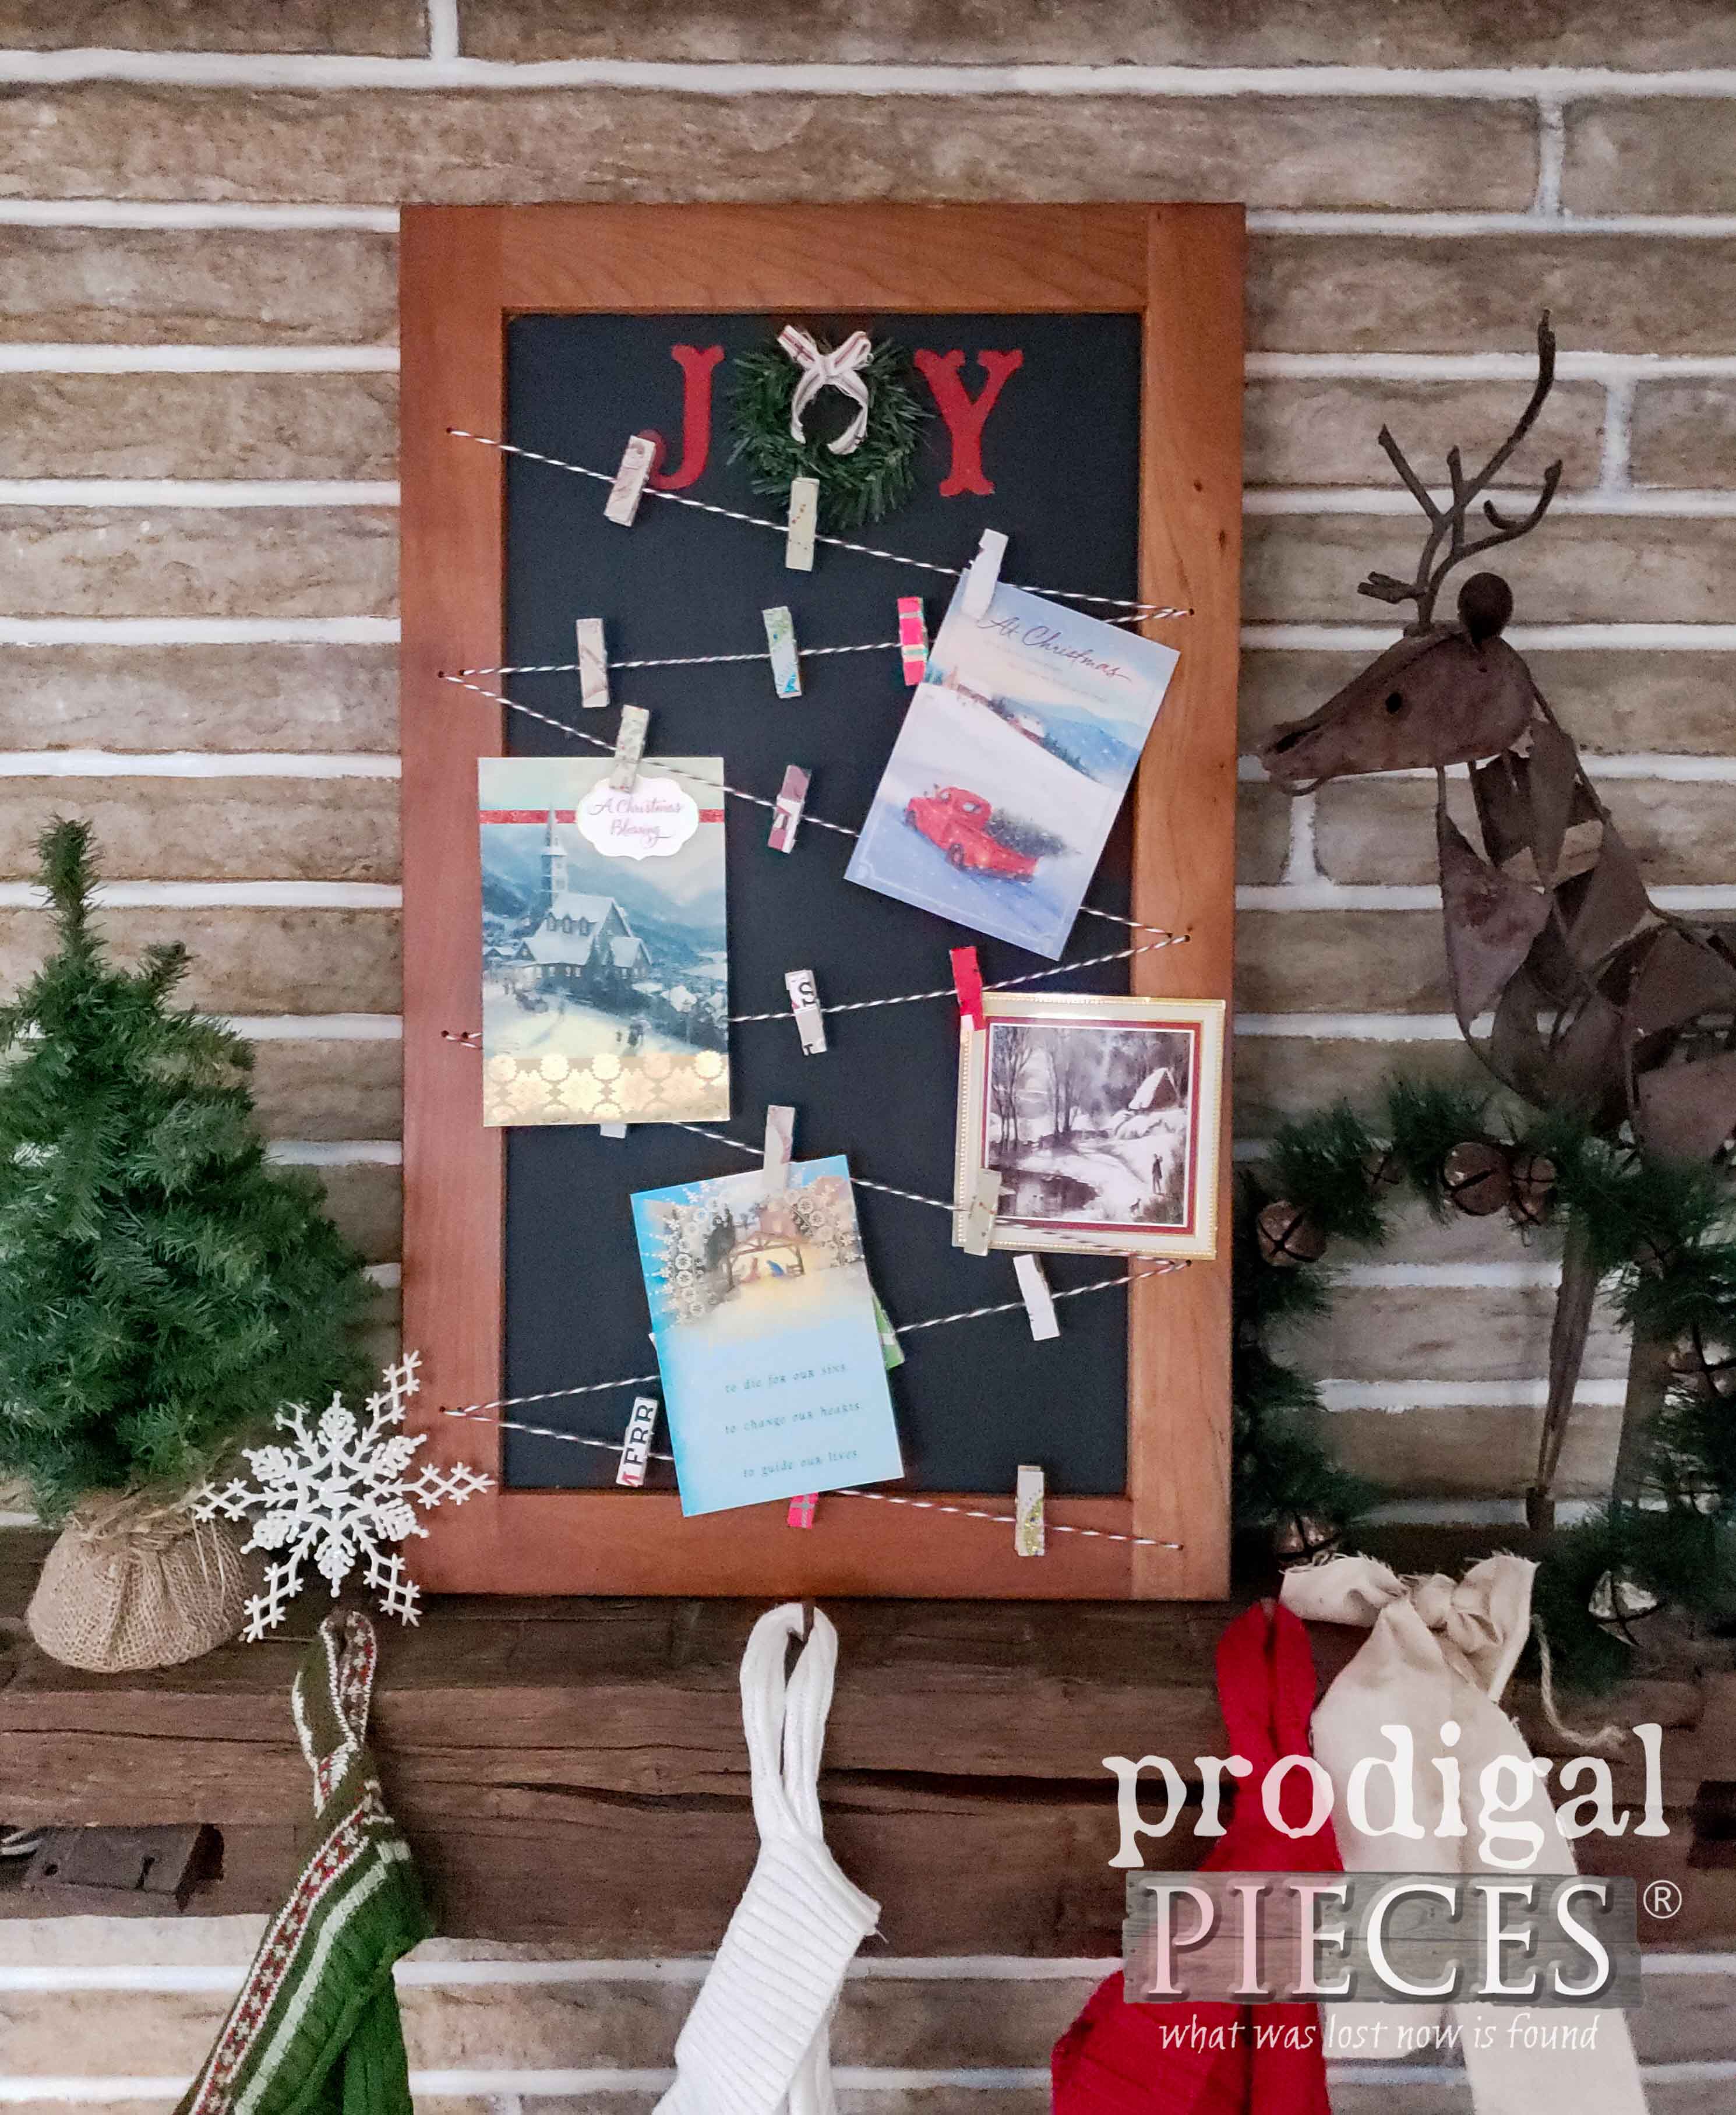 DIY Chalkboard Christmas Card Holder Made from Upcycled Cupboard Door | Tutorial by Prodigal Pieces Kids Create | prodigalpieces.com #prodigalpieces #diy #handmade #christmas #home #homedecor #homedecorideas